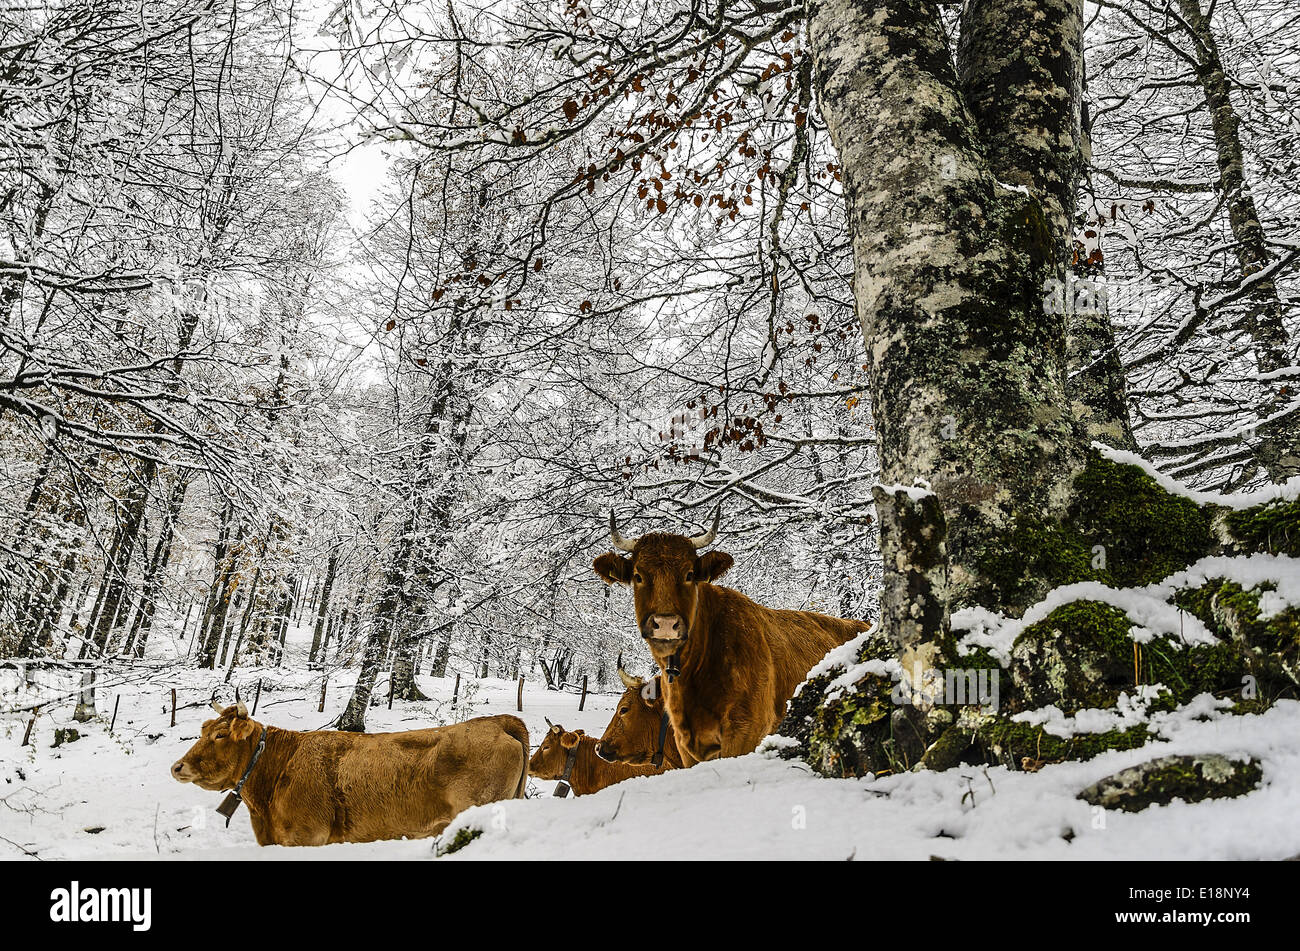 Cows in winter forest Stock Photo